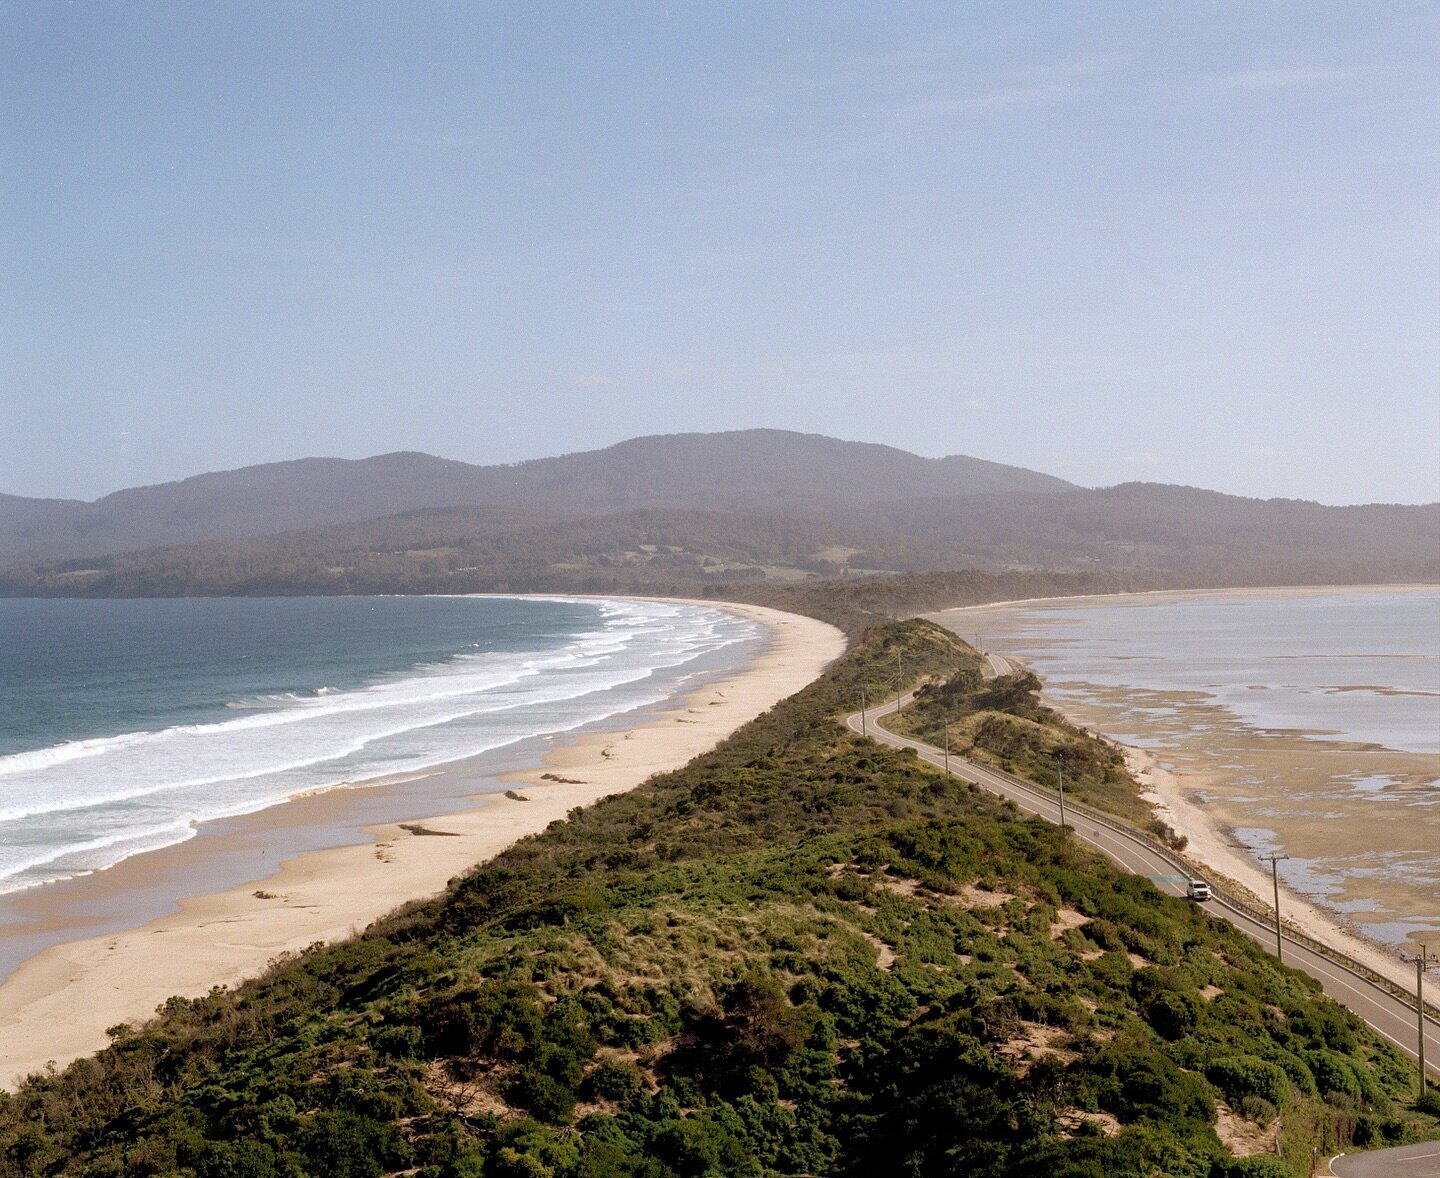 The isthmus of Lunawuni / Bruny Island last year shot on my medium format #Mamiya67RB.⁠
There is no coastline more unique than Tasmania&rsquo;s. The south-east quadrant of the state stretching from Freycinet Peninsula on the east coast, to Bruny Isla